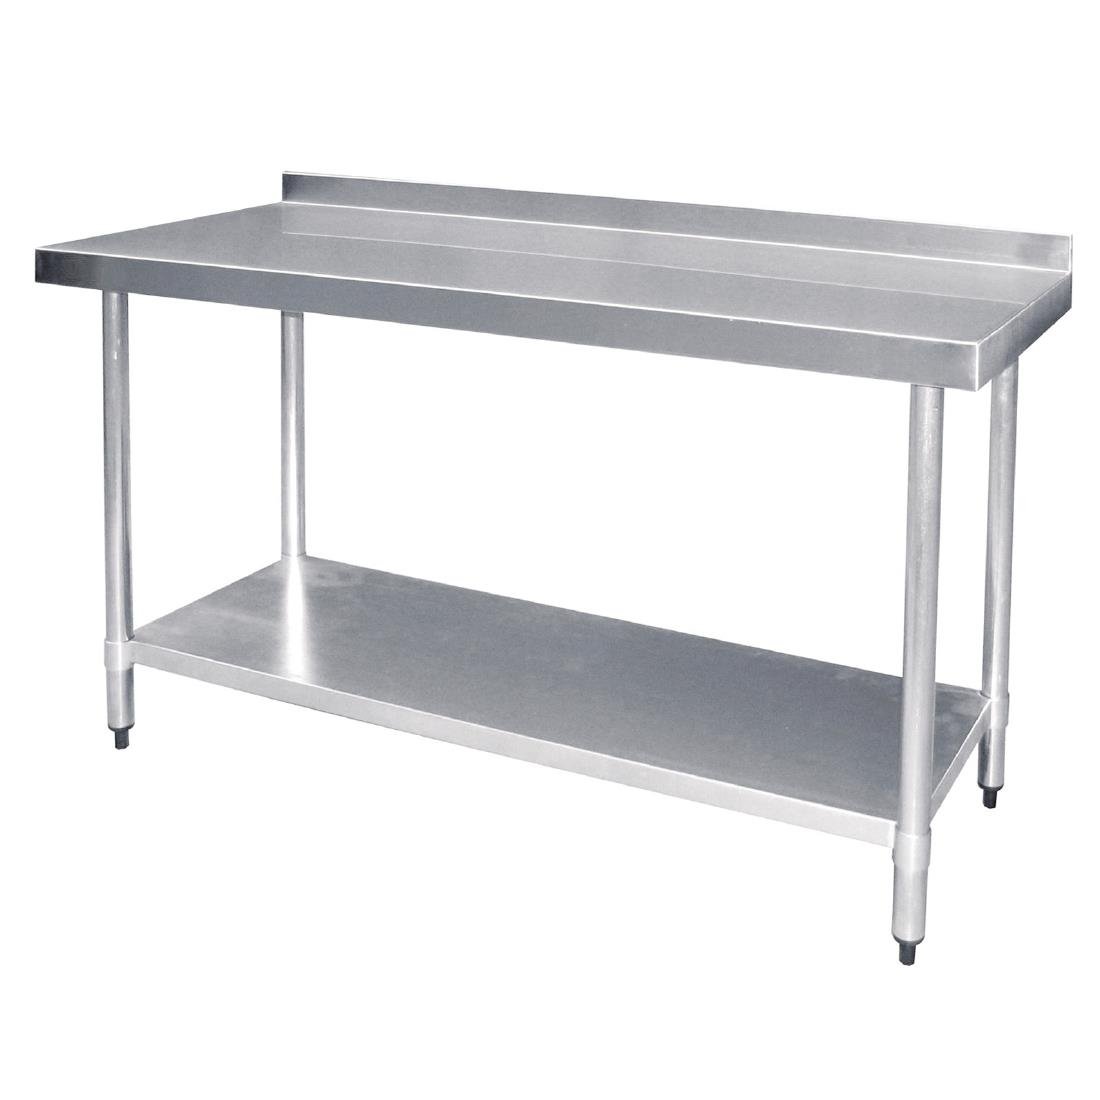 Vogue Stainless Steel Prep Table with Upstand 600mm